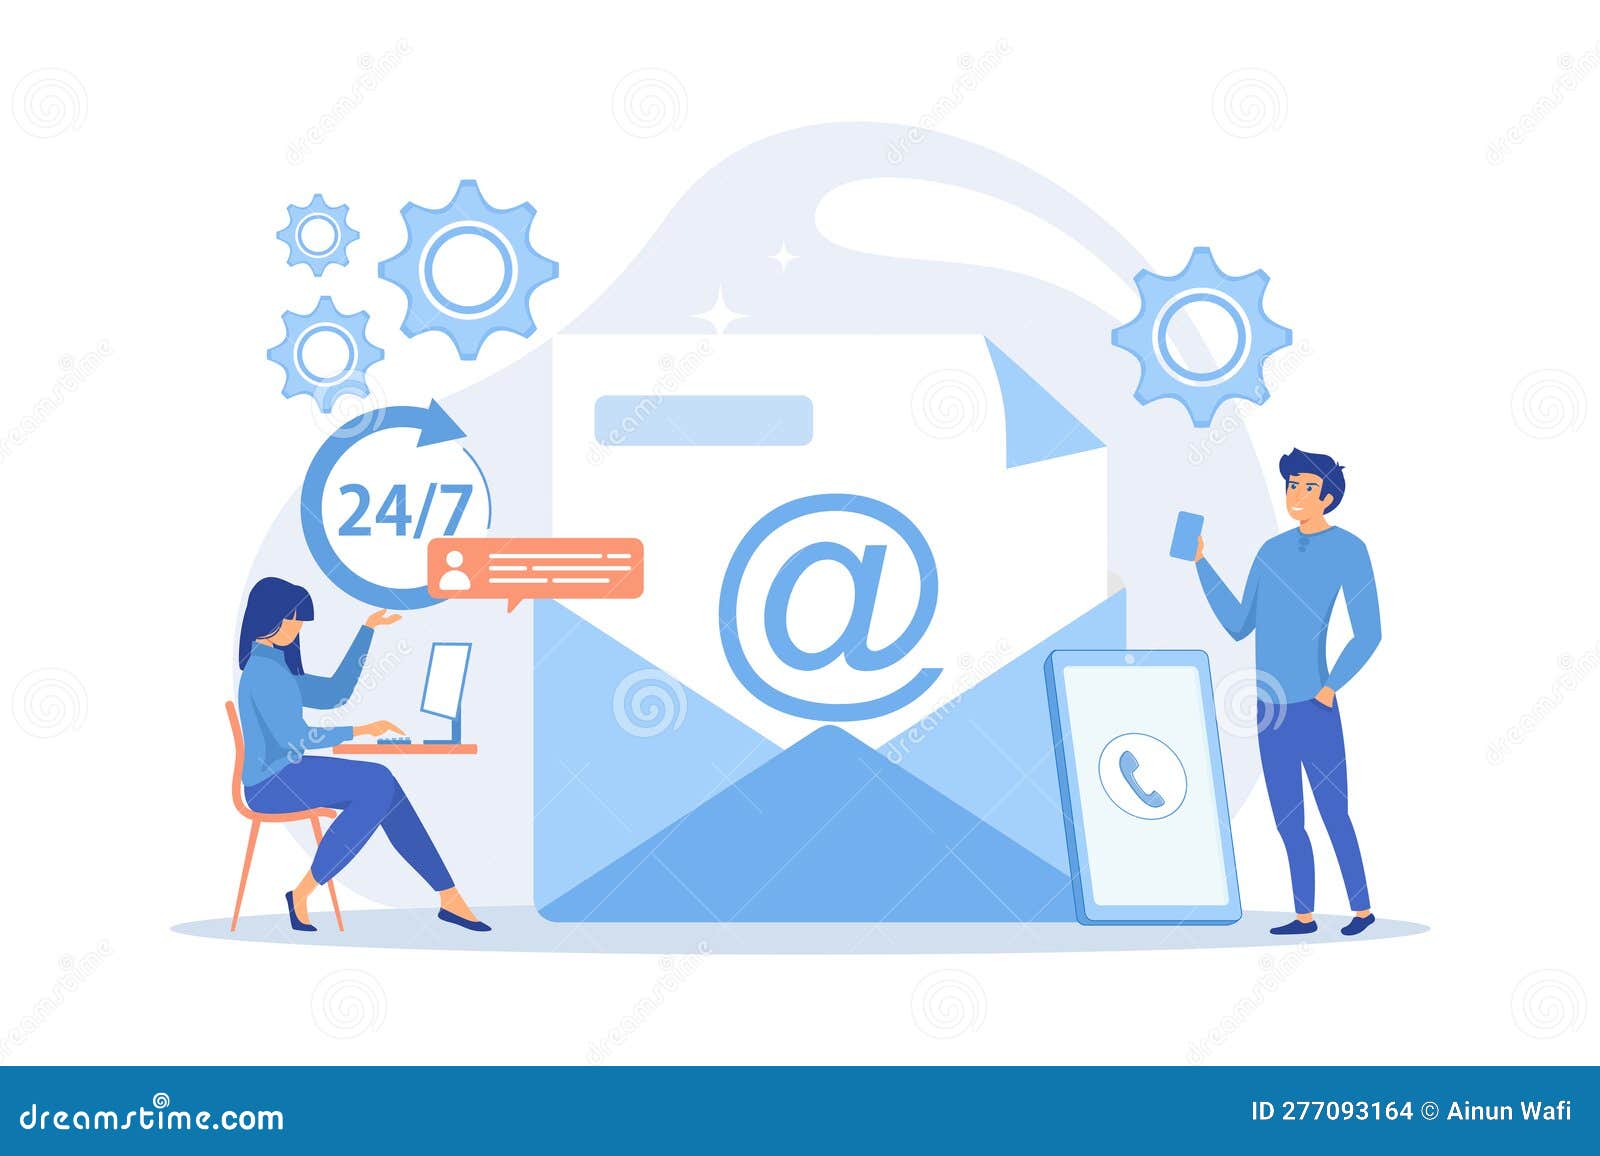 email marketing, internet chatting, 24 hours support. get in touch, initiate contact, contact us,